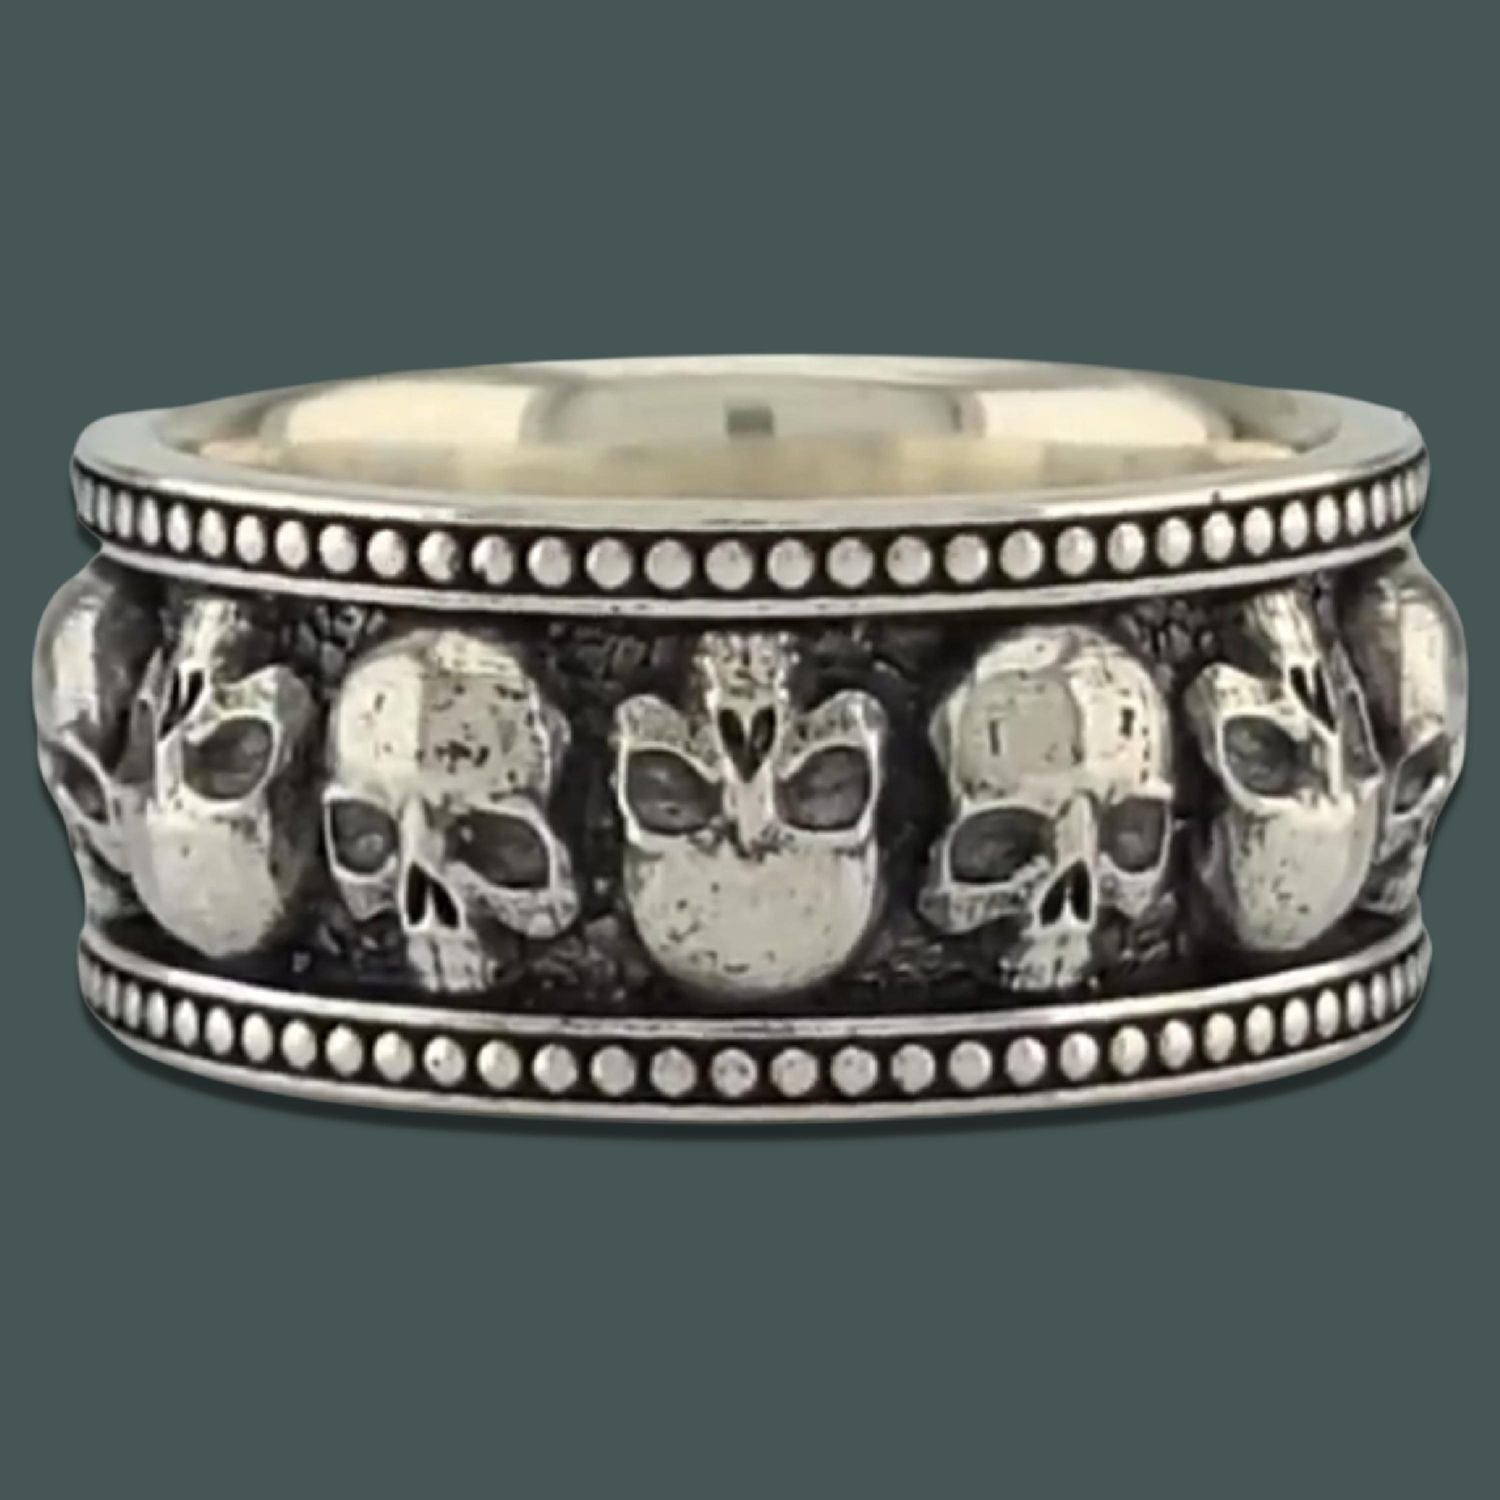 MEMENTO MORI II - Starting at $209 - Celtic Jewelscapes